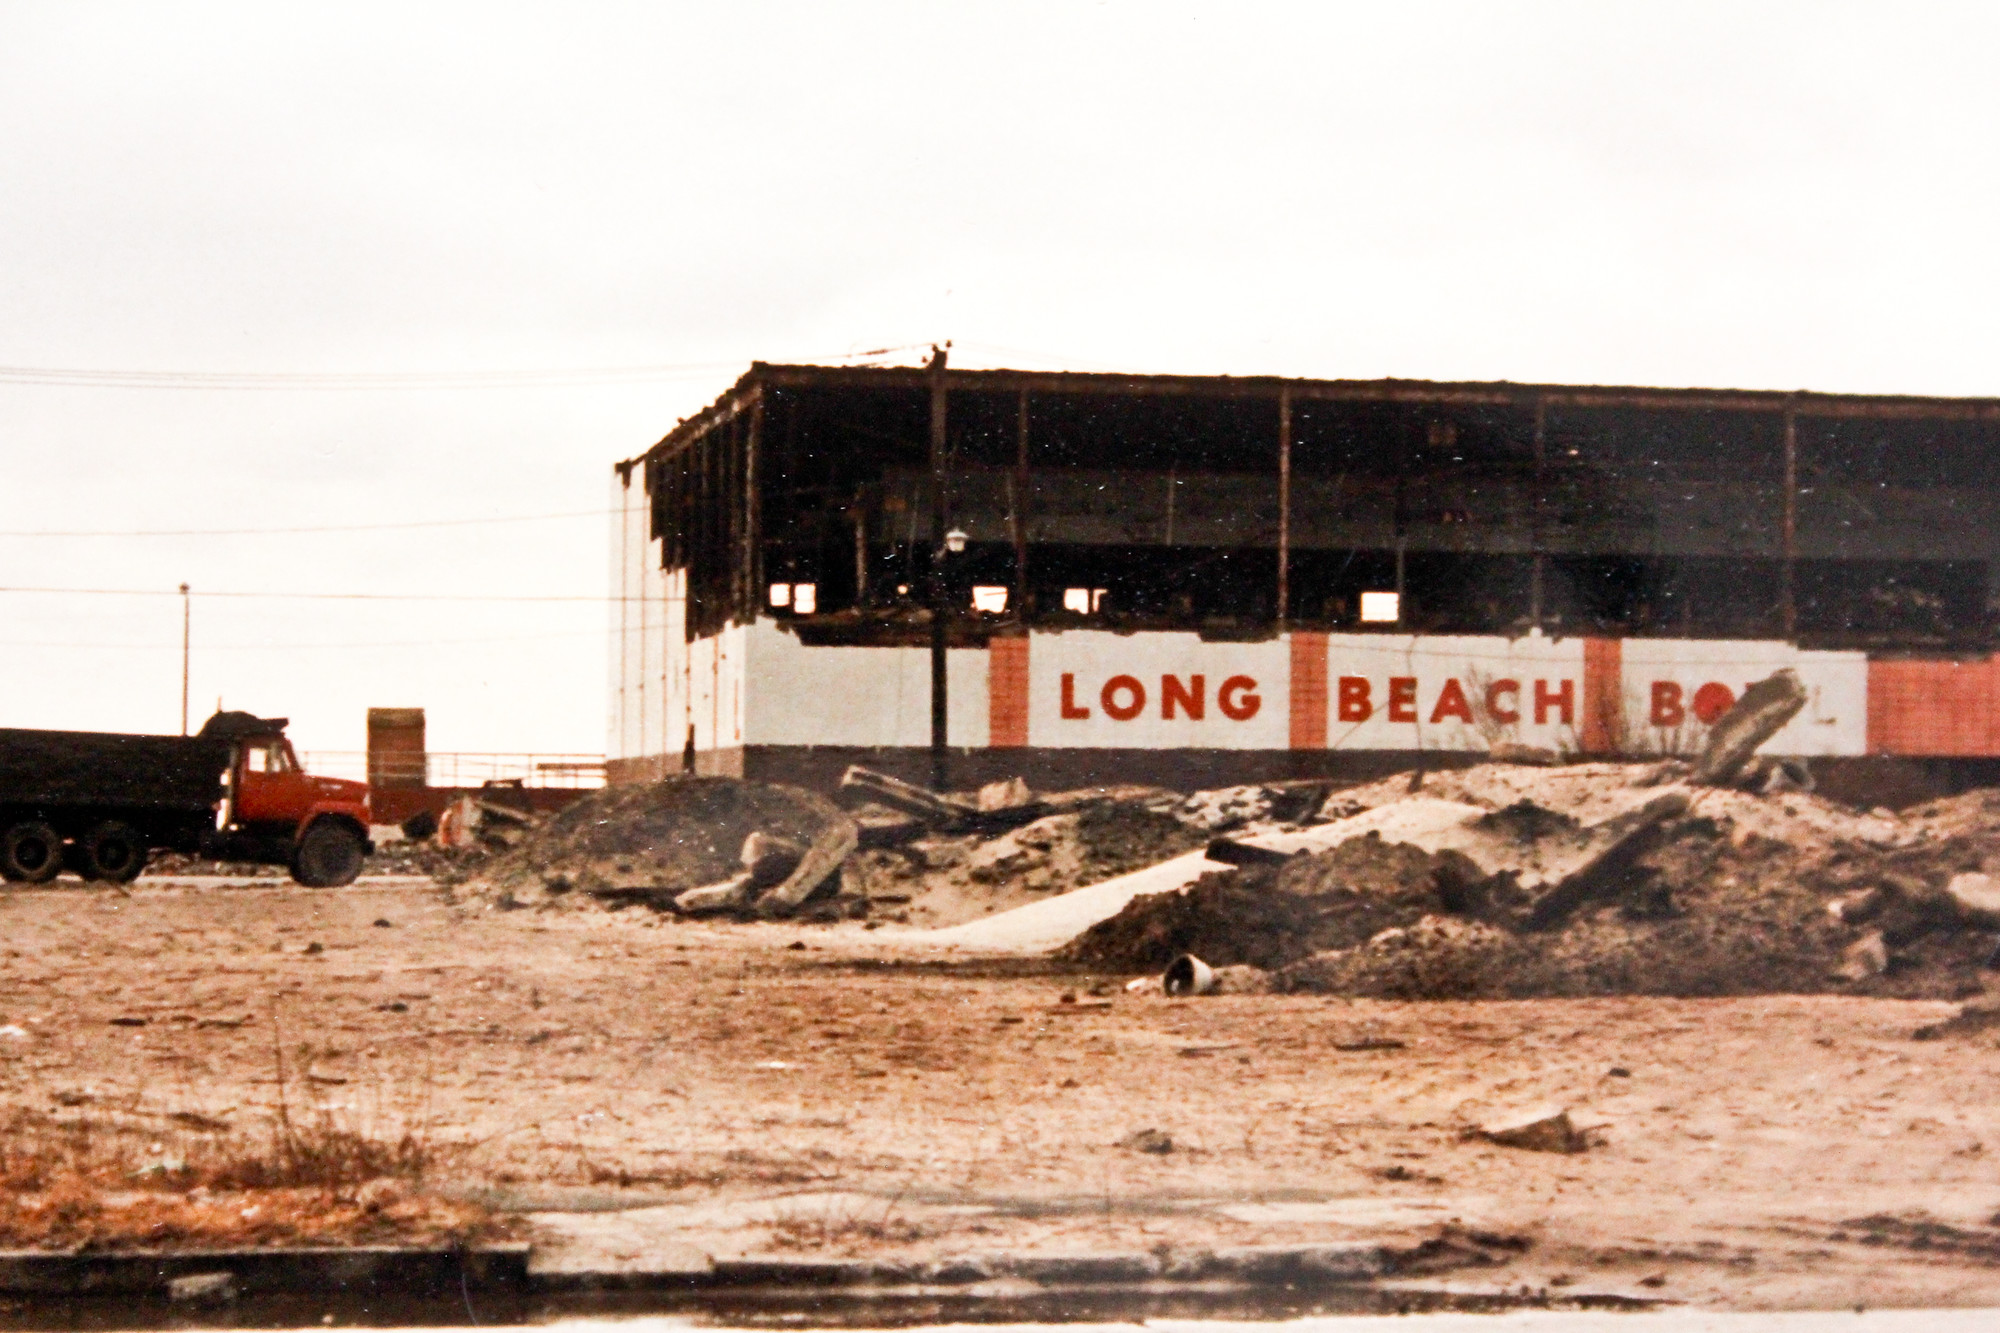 The old Long Beach bowl on the Superblock was torn down in the 1980s.